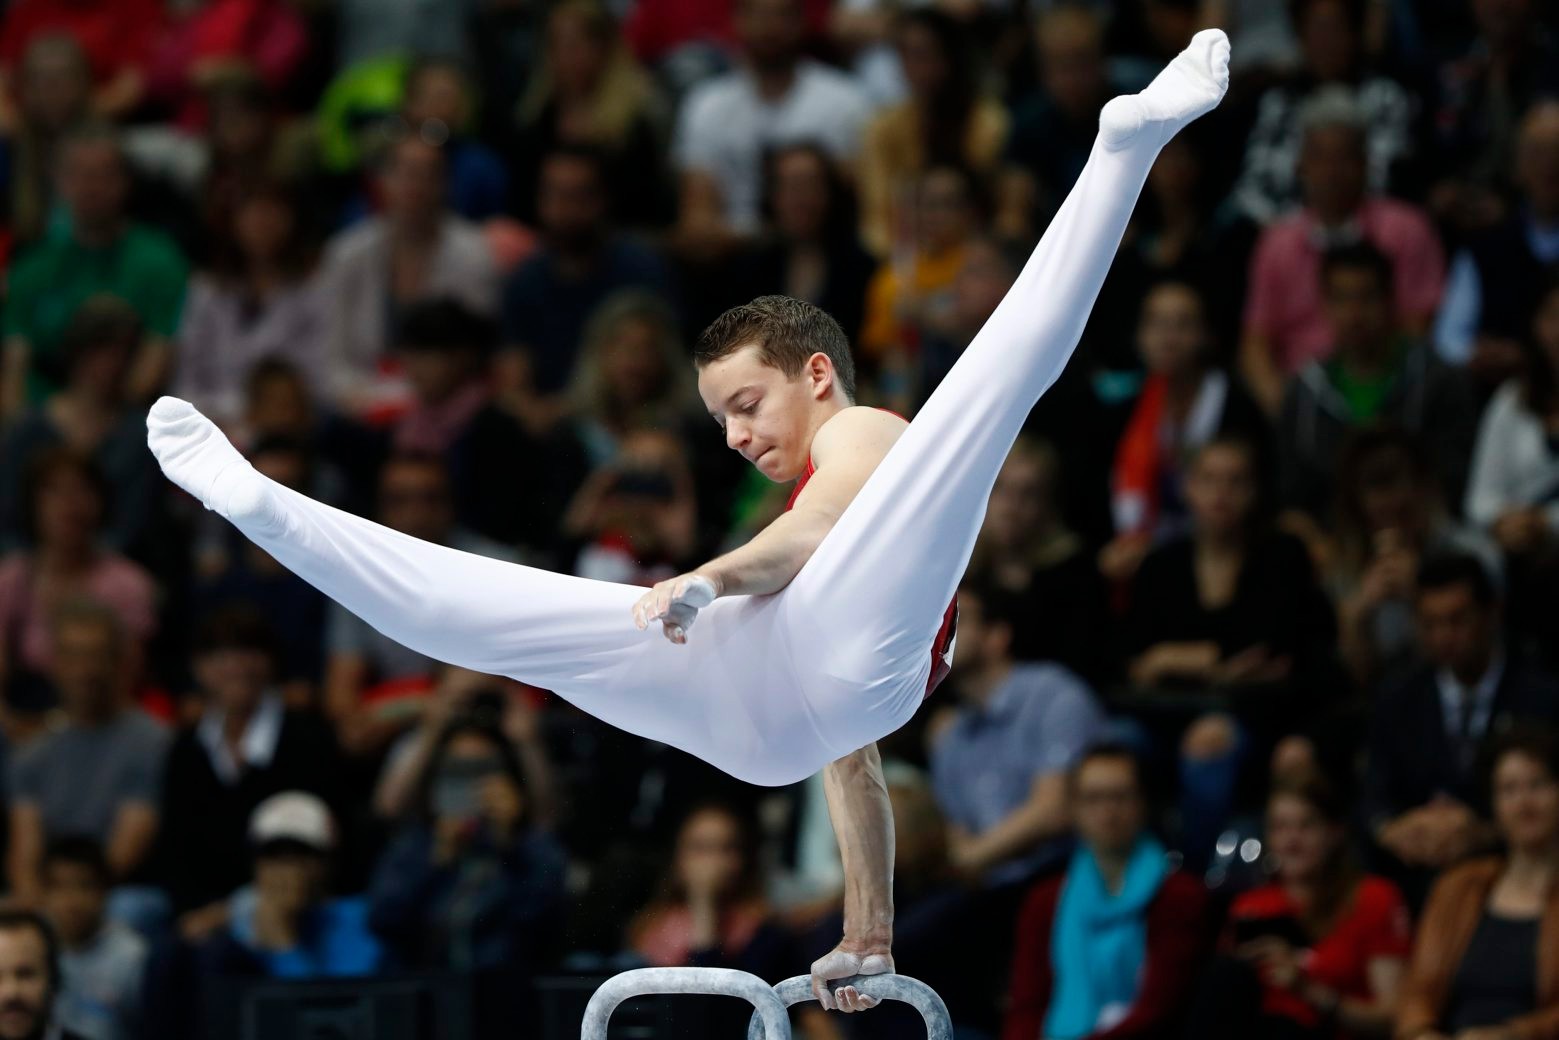 Christian Baumann from Switzerland performs on the pommel horse during the Men's Apparatus Finals at the European Men's and Women's Artistic Gymnastics Championships at the Postfinance Arena in Bern, Switzerland, Sunday, May 29, 2016. (KEYSTONE/Peter Klaunzer) SWITZERLAND EUROPEAN GYMNASTICS CHAMPIONSHIPS